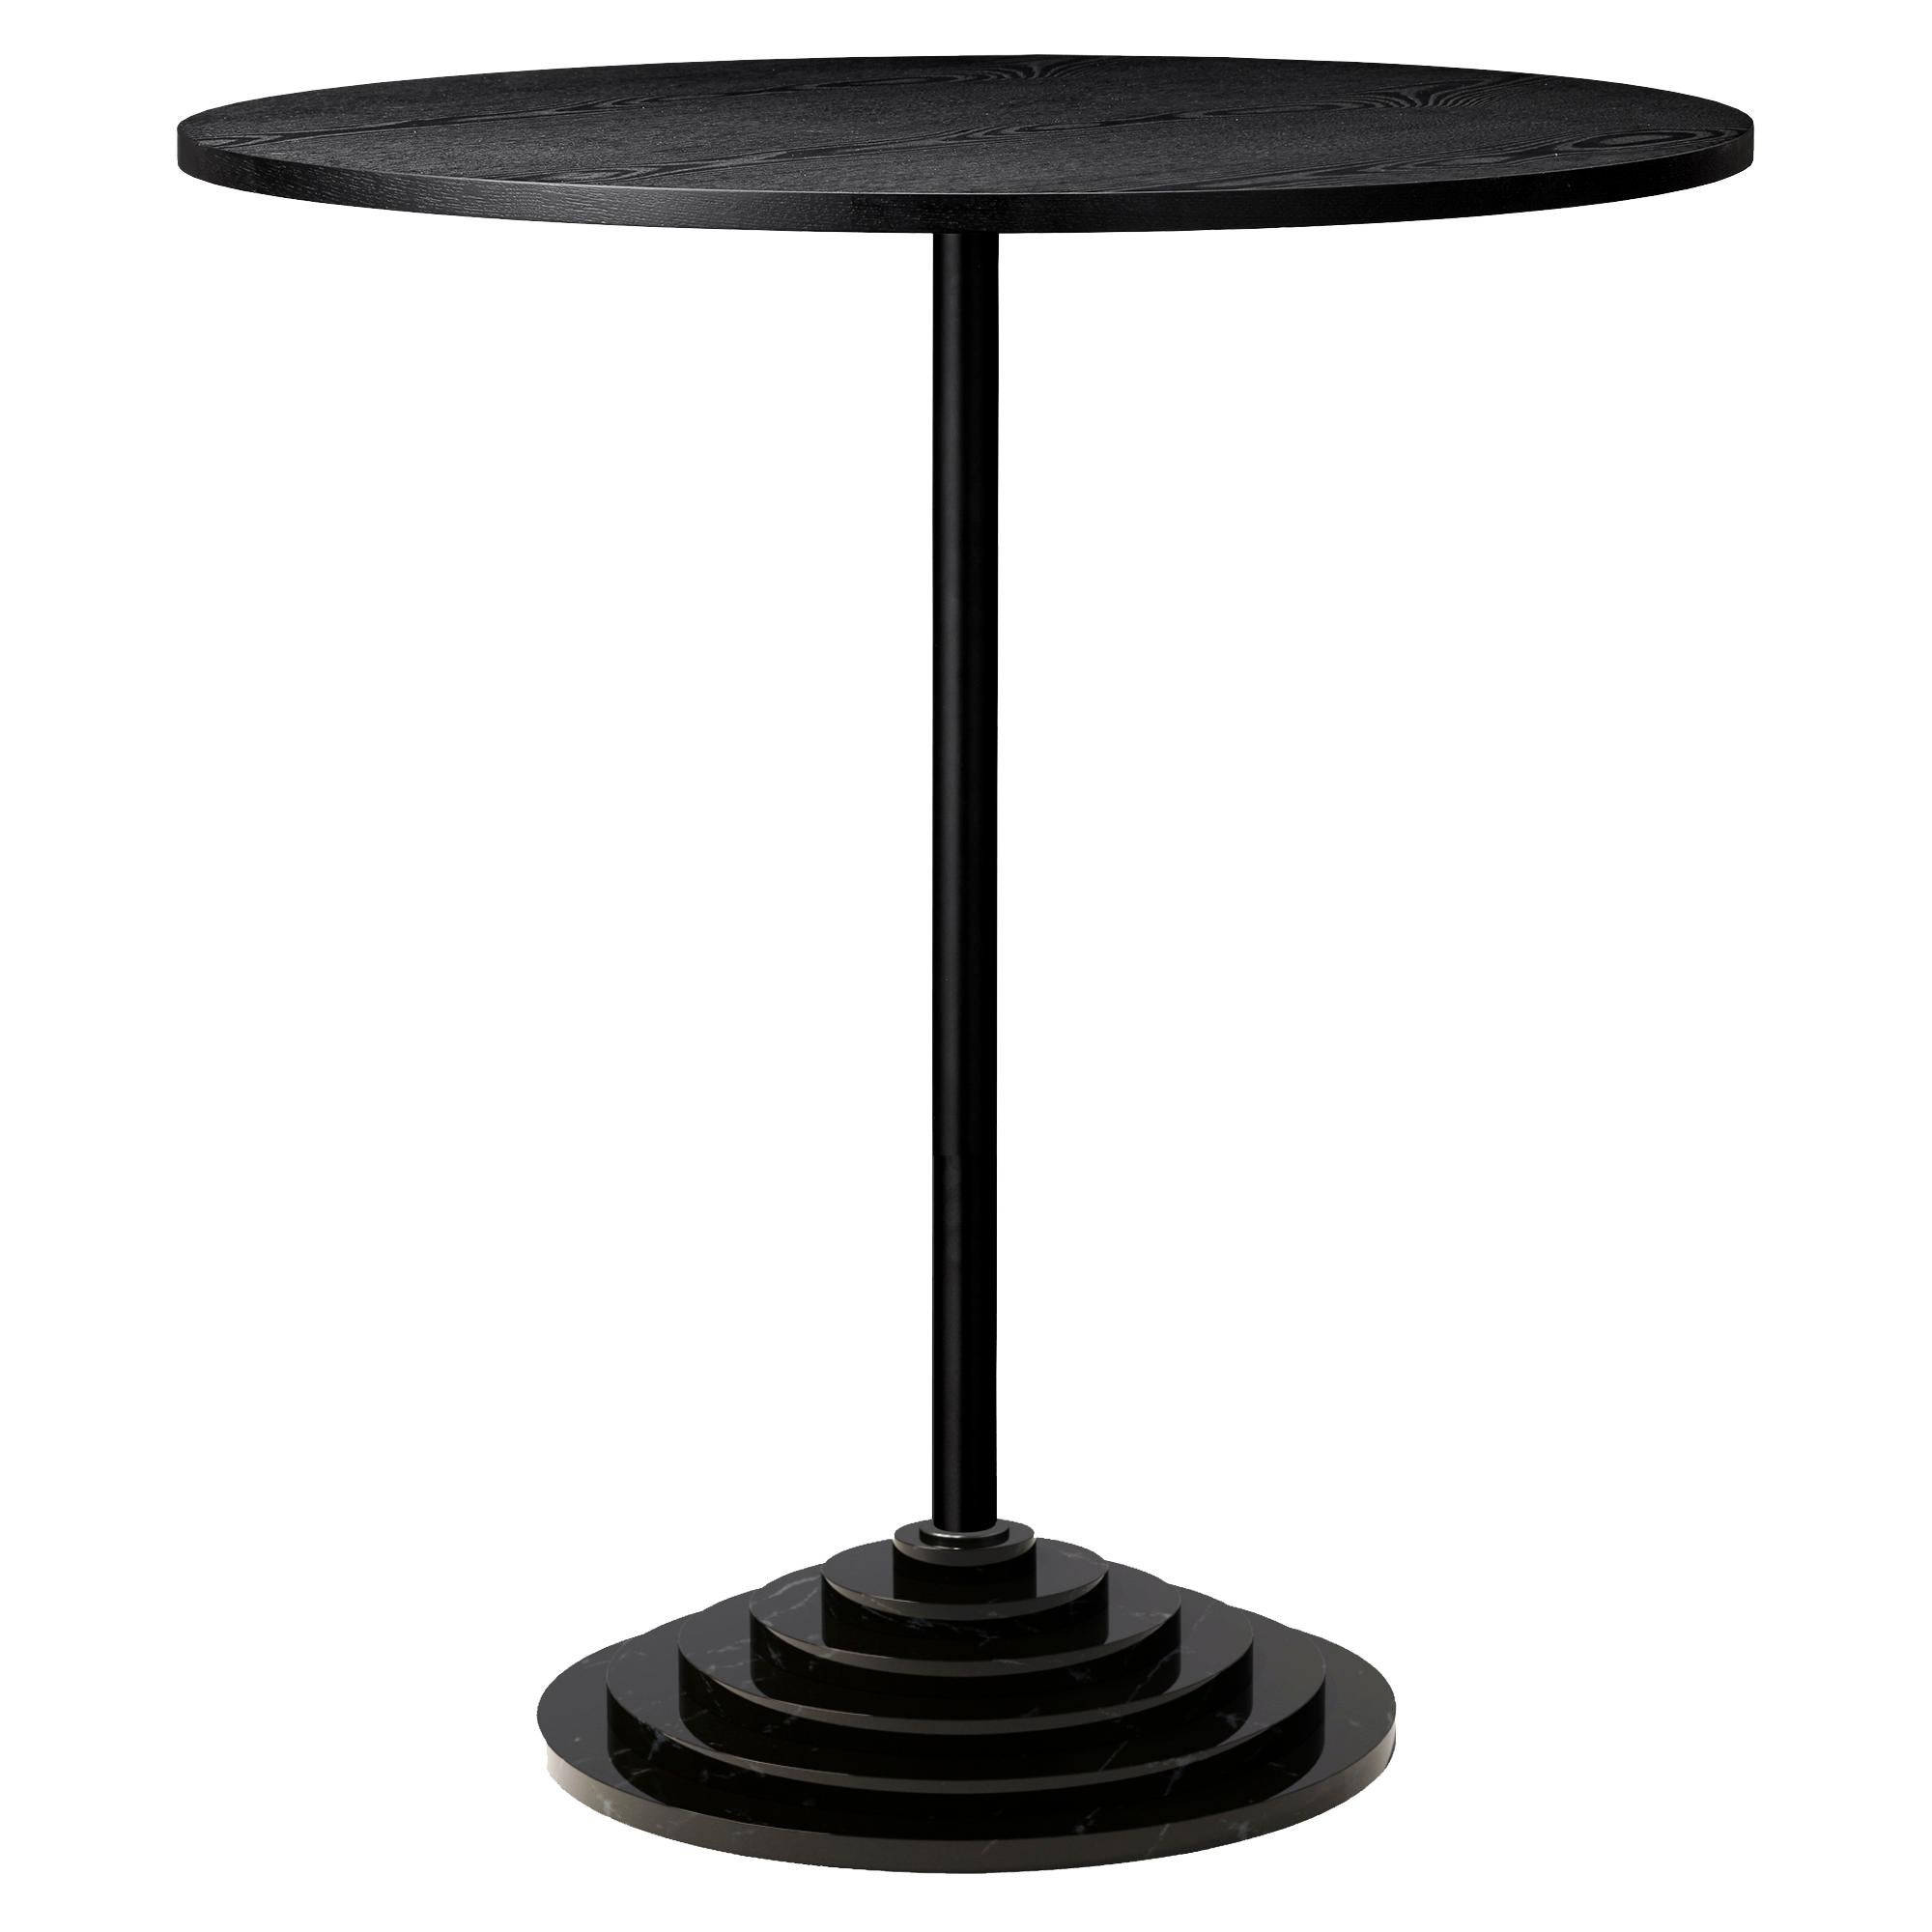 Black marble base and steel high table.
Dimensions: Ø 70 x H 74 cm
Materials: Steel frame, marble base and veneer

Elegant table with a heavy marble base which creates an unique look.